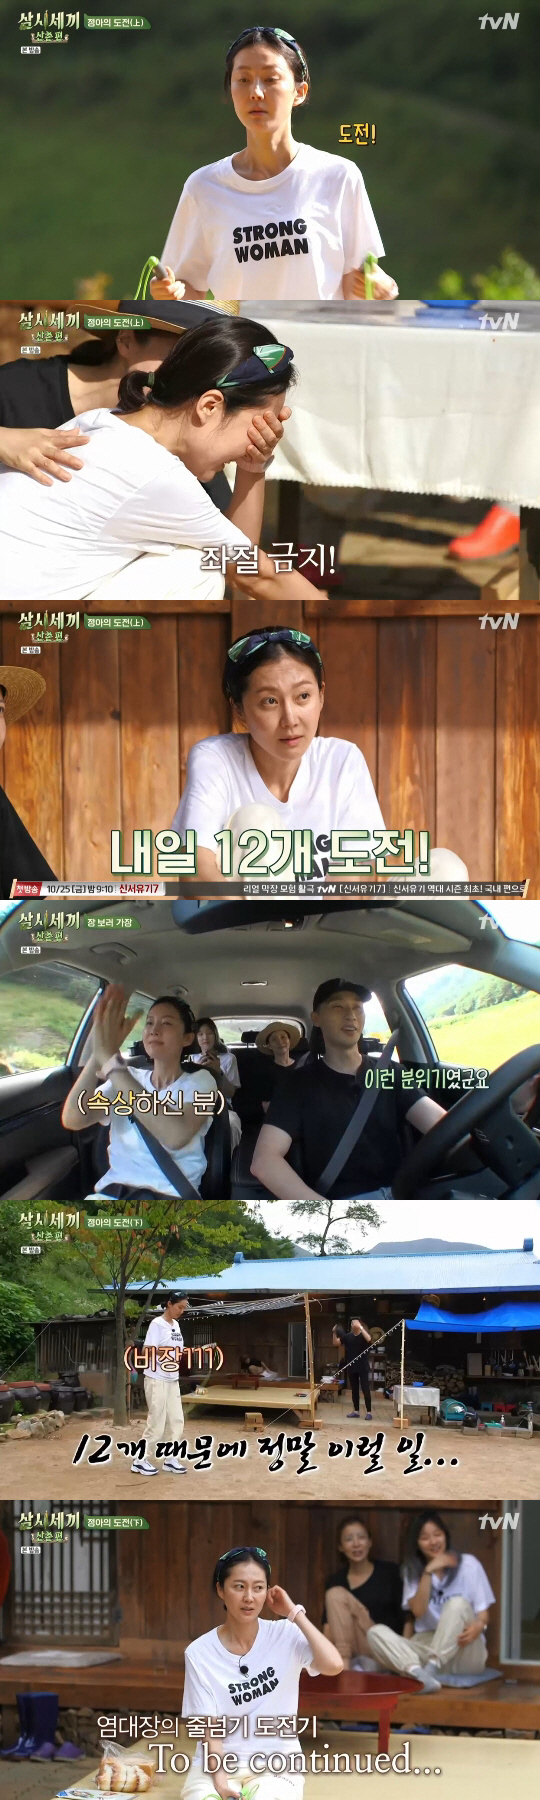 Three Meals a Day Mountain Village Yum Jung-ah succeeded in Jump rope retap Model with endless effort.On TVN Three Meals a Day Mountain Village broadcasted on the night of the 11th, Yum Jung-ah was portrayed to burn his passion for Jump rope.Yum Jung-ah was the top model for 10 regular Jump lopes, following Park Seo-joons two-speed Jump lope.Yum Jung-ah crossed the line unreservedly, even in the precarious gesture of the entire body moving forward every time he ran the Jump rope.However, it failed unfortunately in nine, and Yum Jung-ah was frustrated.Yum Jung-ah repeatedly apologized when his allowance was reduced because of him, and predicted the Top Model, I will come to the money I lost.Yum Jung-ah, who showed sorry and upset throughout the trip to the chapter, went into Jump rope practice with the intention of success as soon as he returned home.Is this going to happen now because of 12, he said, but he was working on Jump rope practice with Park Seo-joons Kochi.Yum Jung-ah did not forget to practice Jump rope after dinner, and practiced while checking his posture while preparing for breakfast the next morning.In the support of the members, Yum Jung-ah decided to do Jump rope Top Model before going to see the chapter.Yum Jung-ah, who was sensitive ahead of Top Model, practiced his last practice for the timing without the production team and succeeded in 12 Jump ropes.Twelve are the goal yesterday, and after a day and practicing, I will play in the Olympics, said Yum Jung-ah, who appeared confident.The production crew and members eventually agreed on 16 Jump ropes after a fierce nervous battle.Yum Jung-ah crossed the line, paying attention to the arms that were pointed out earlier by Park Seo-joon and Yunsea, and finally succeeded in reaching over 16.Yum Jung-ah said, I played while thinking about our real children. The members applauded and were delighted together.